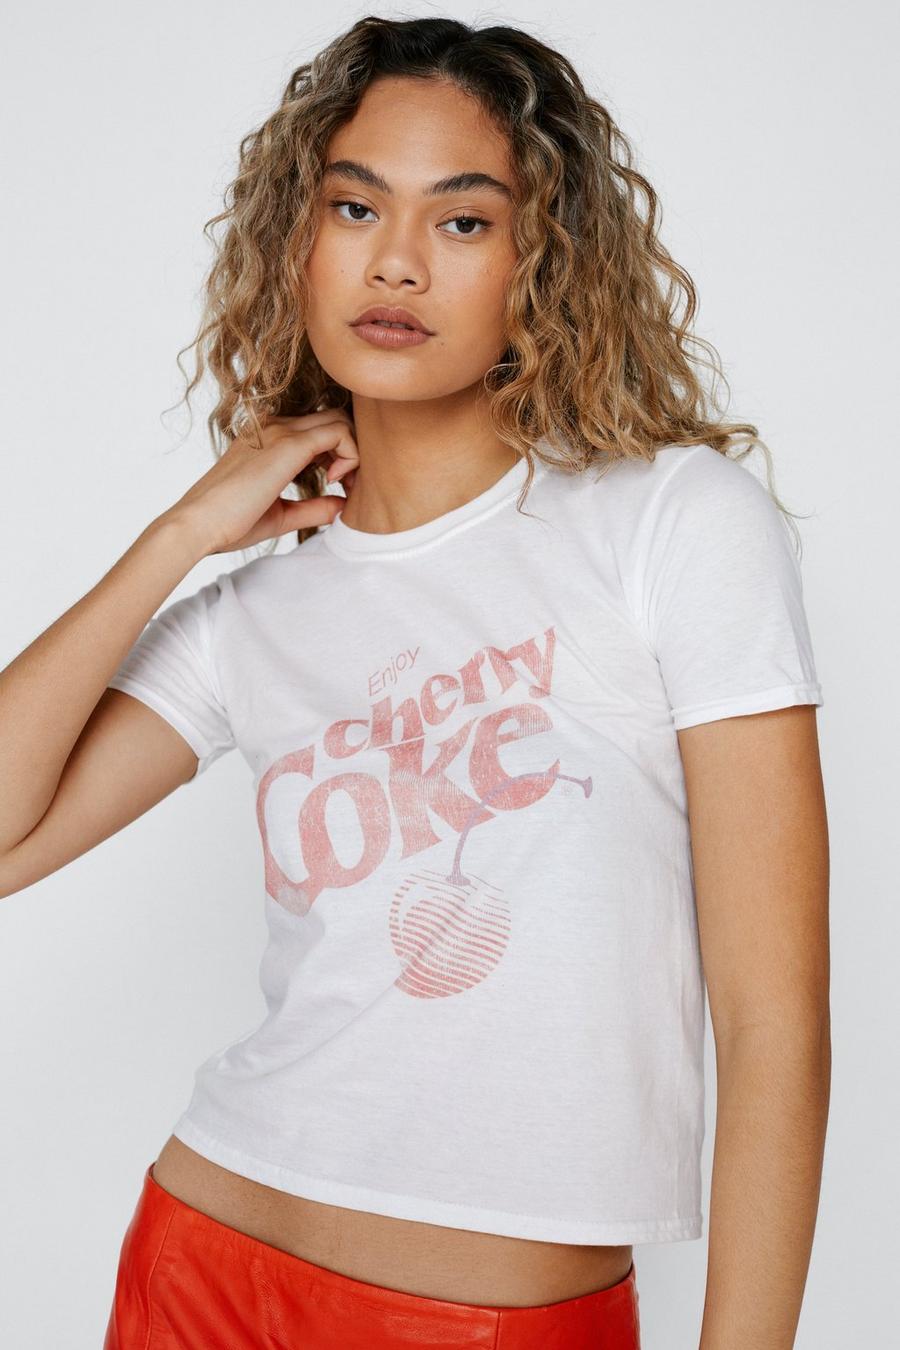 Cherry Coke Fitted Graphic T-shirt